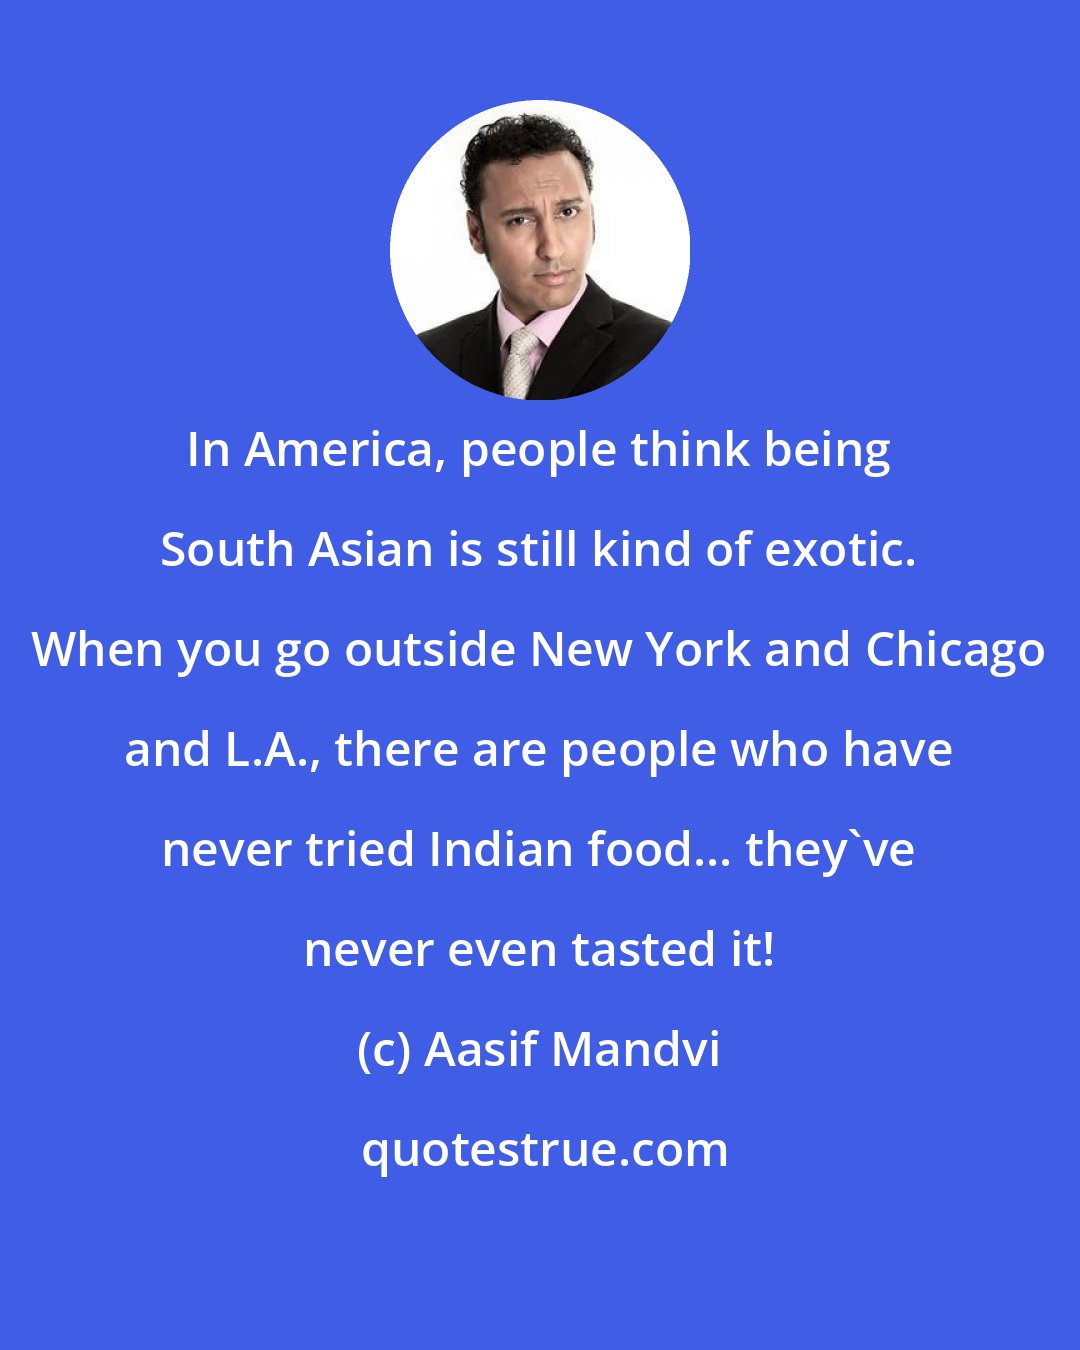 Aasif Mandvi: In America, people think being South Asian is still kind of exotic. When you go outside New York and Chicago and L.A., there are people who have never tried Indian food... they've never even tasted it!